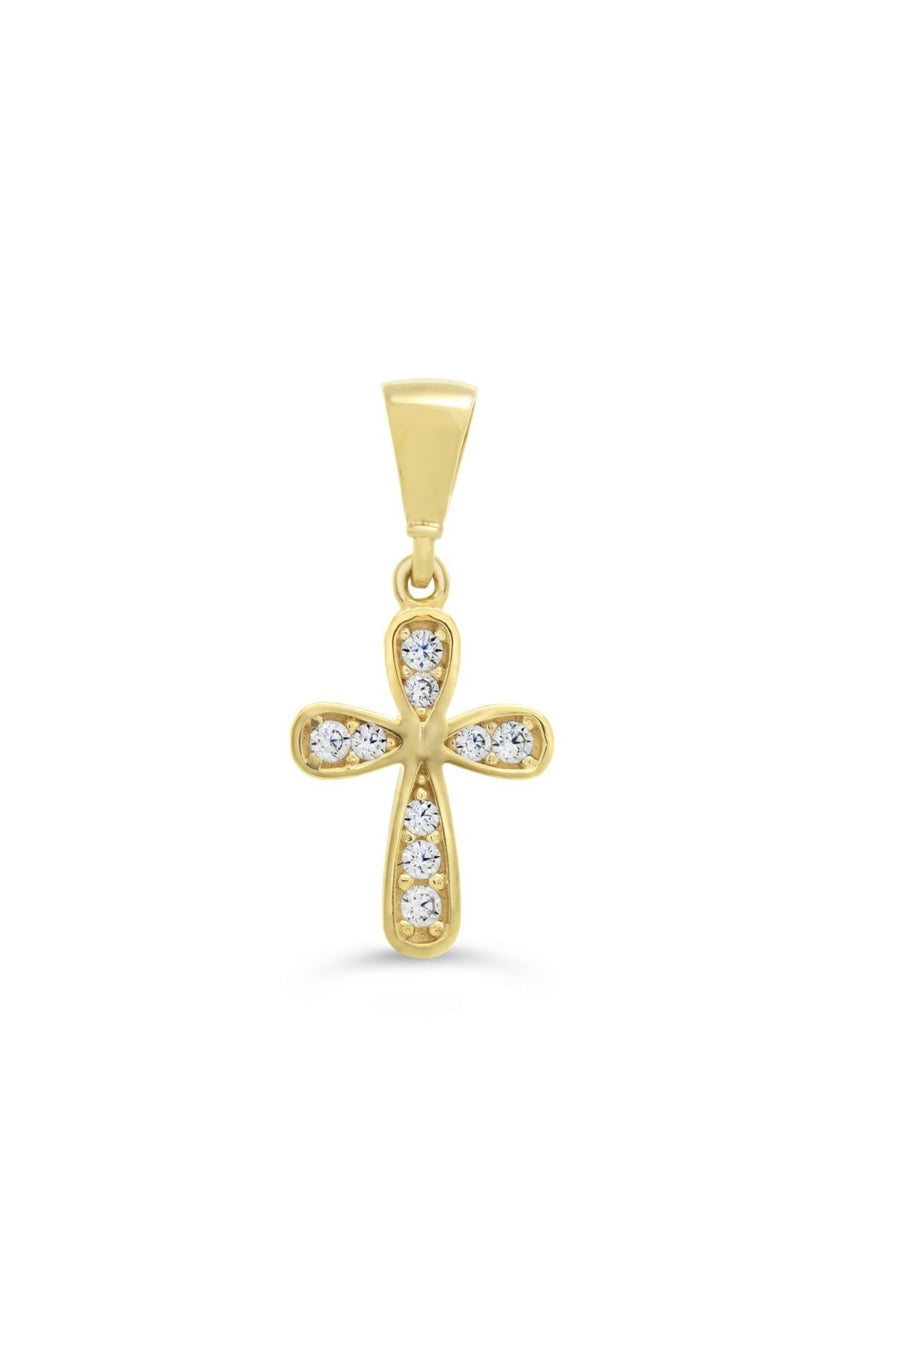 10k Gold Cross with CZ